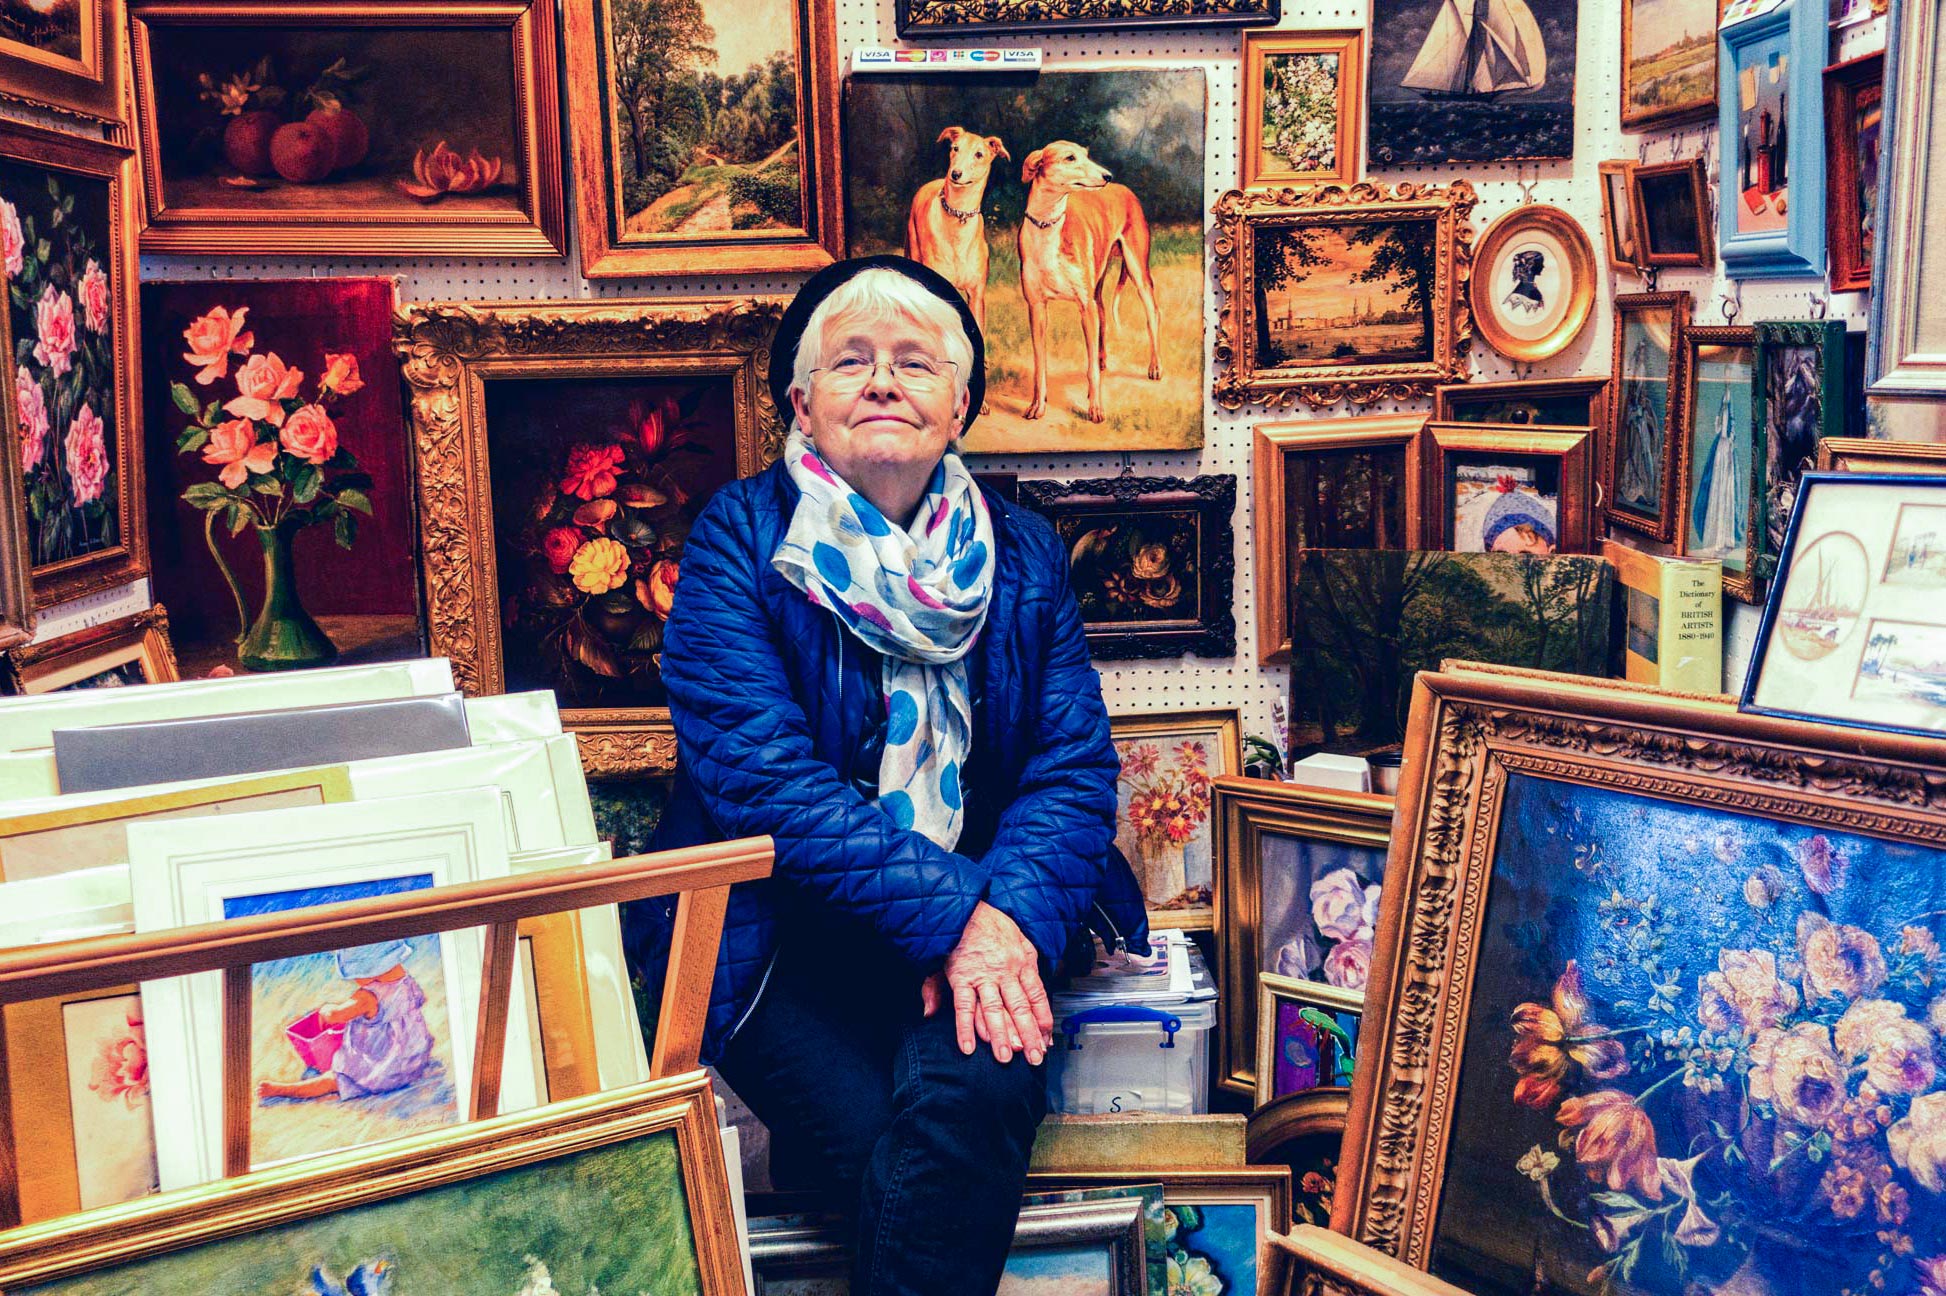 An elderly woman sells artwork in a renowned London market, surrounded by paintings in gold guild frames. Captured by Wright Content, an environmental portrait photographer in London.